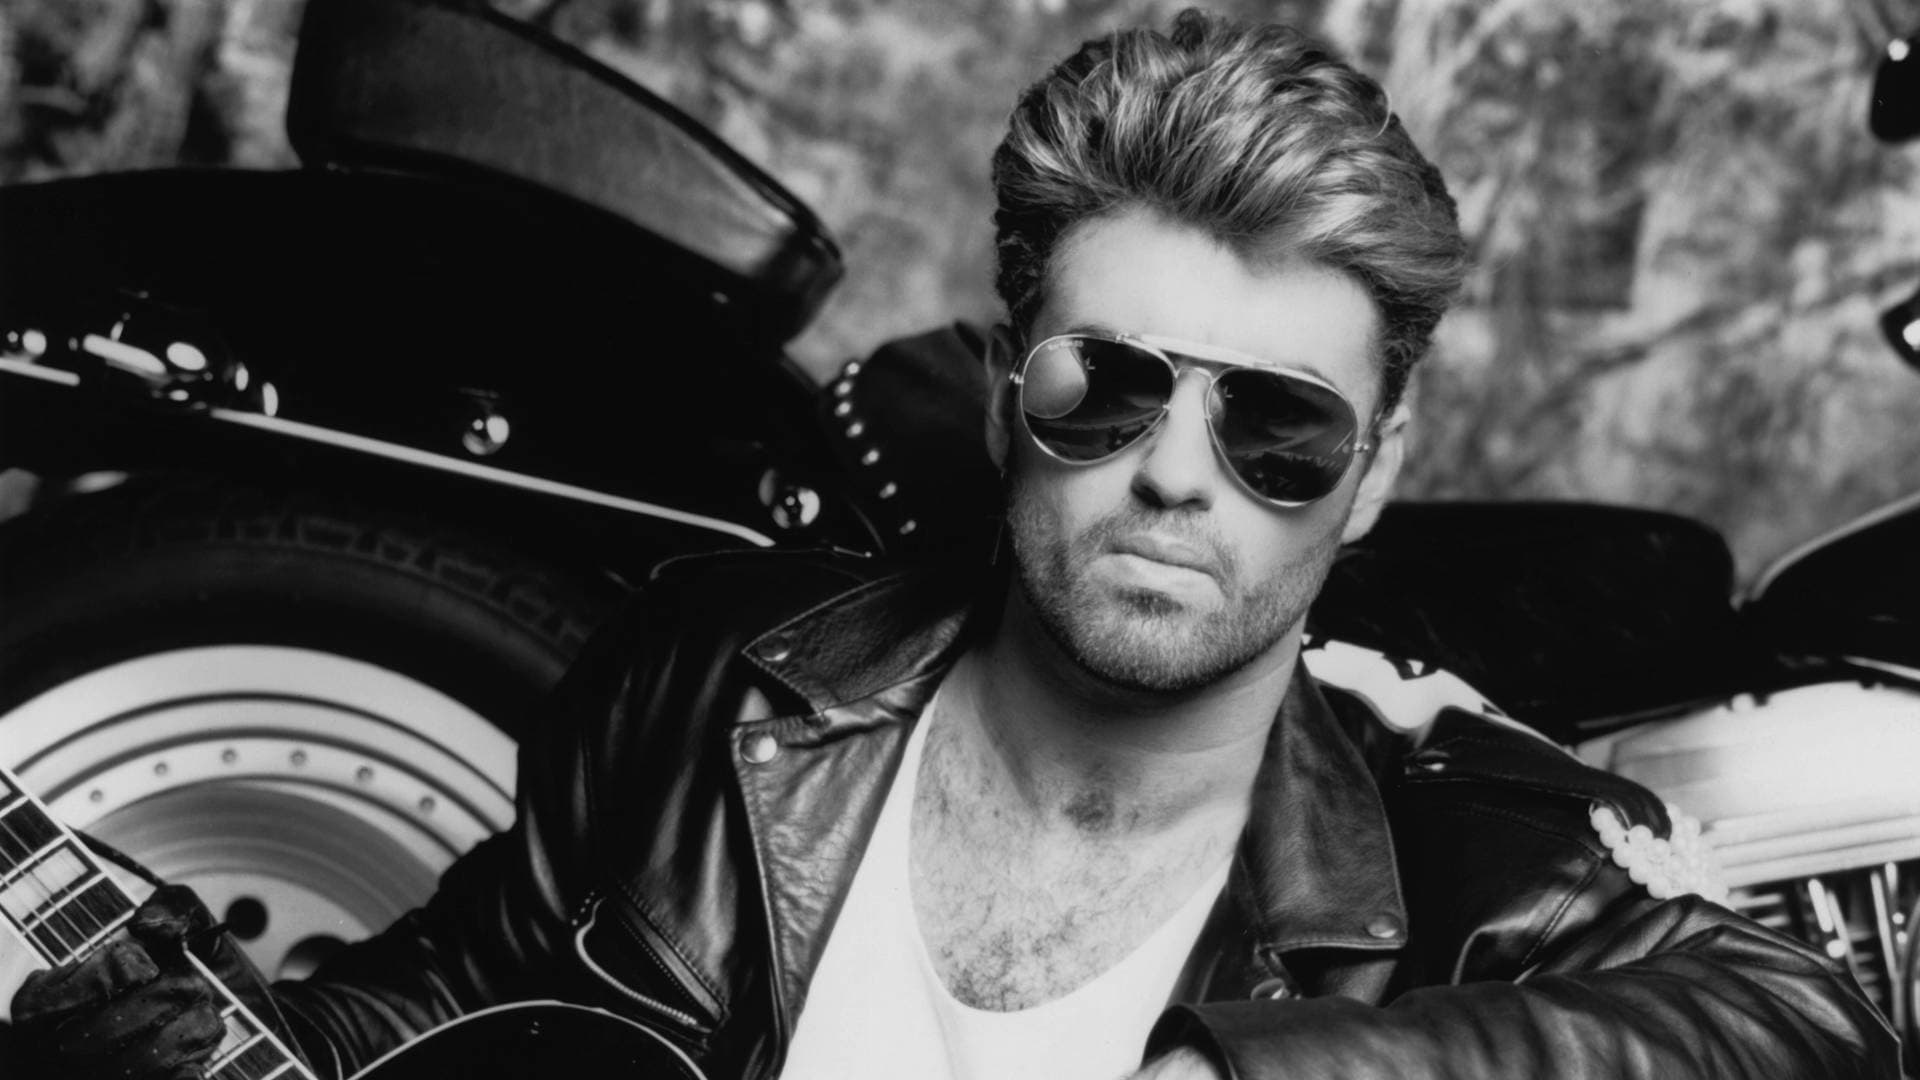 George Michael: Freedom, 2017, Documentary covering the formative period in the late Grammy Award winner's life. 1920x1080 Full HD Wallpaper.